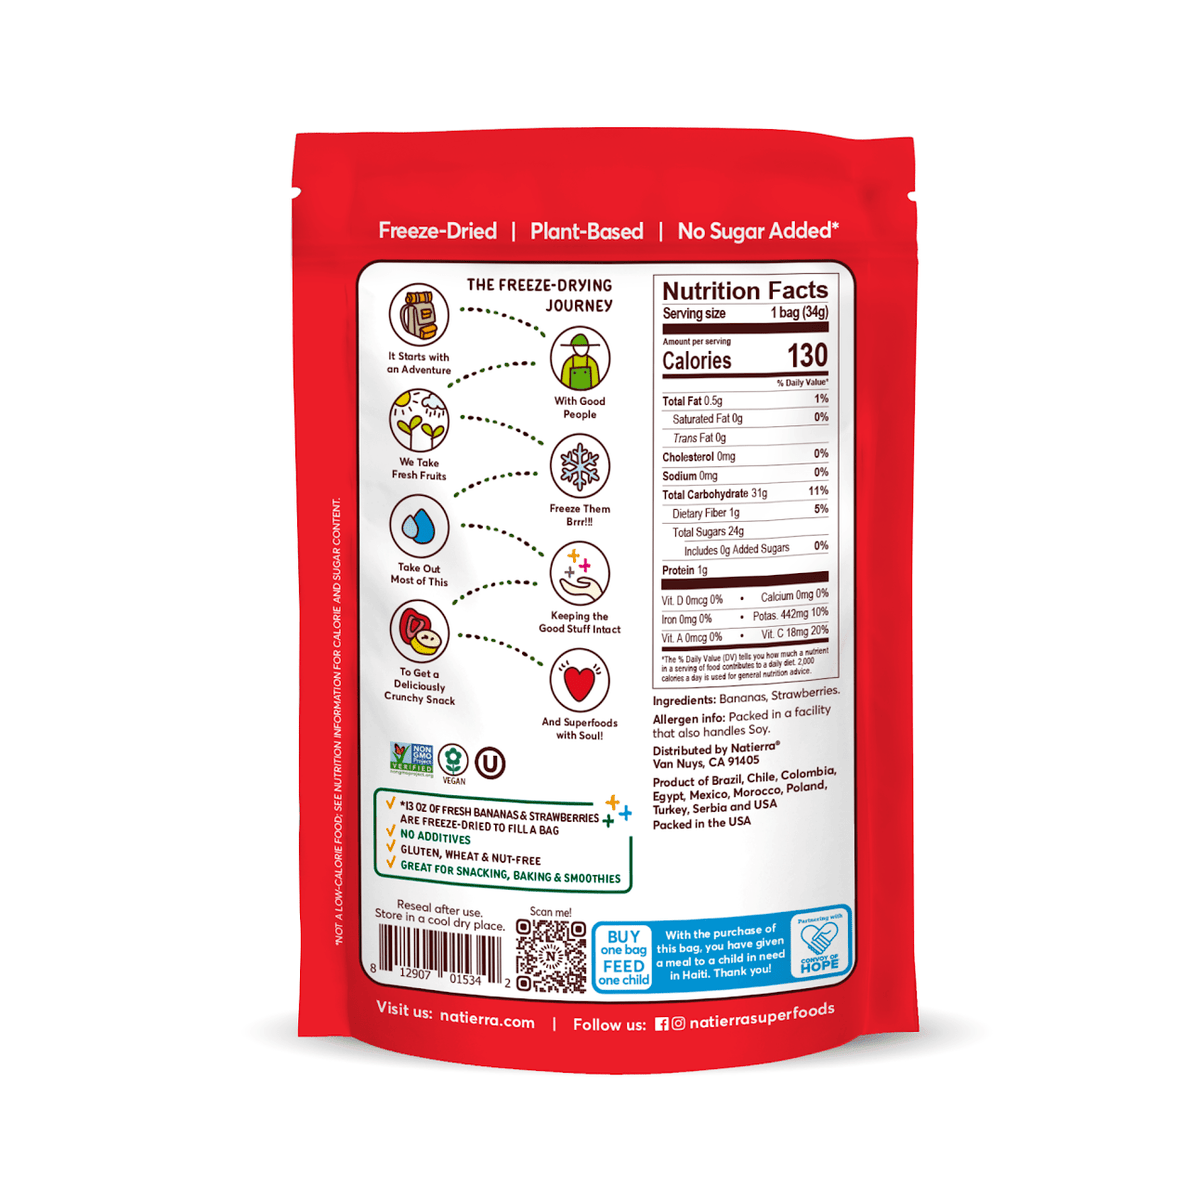 Natierra Freeze-Dried Bananas and Strawberries bag with Nutrition facts, journey and main product claims